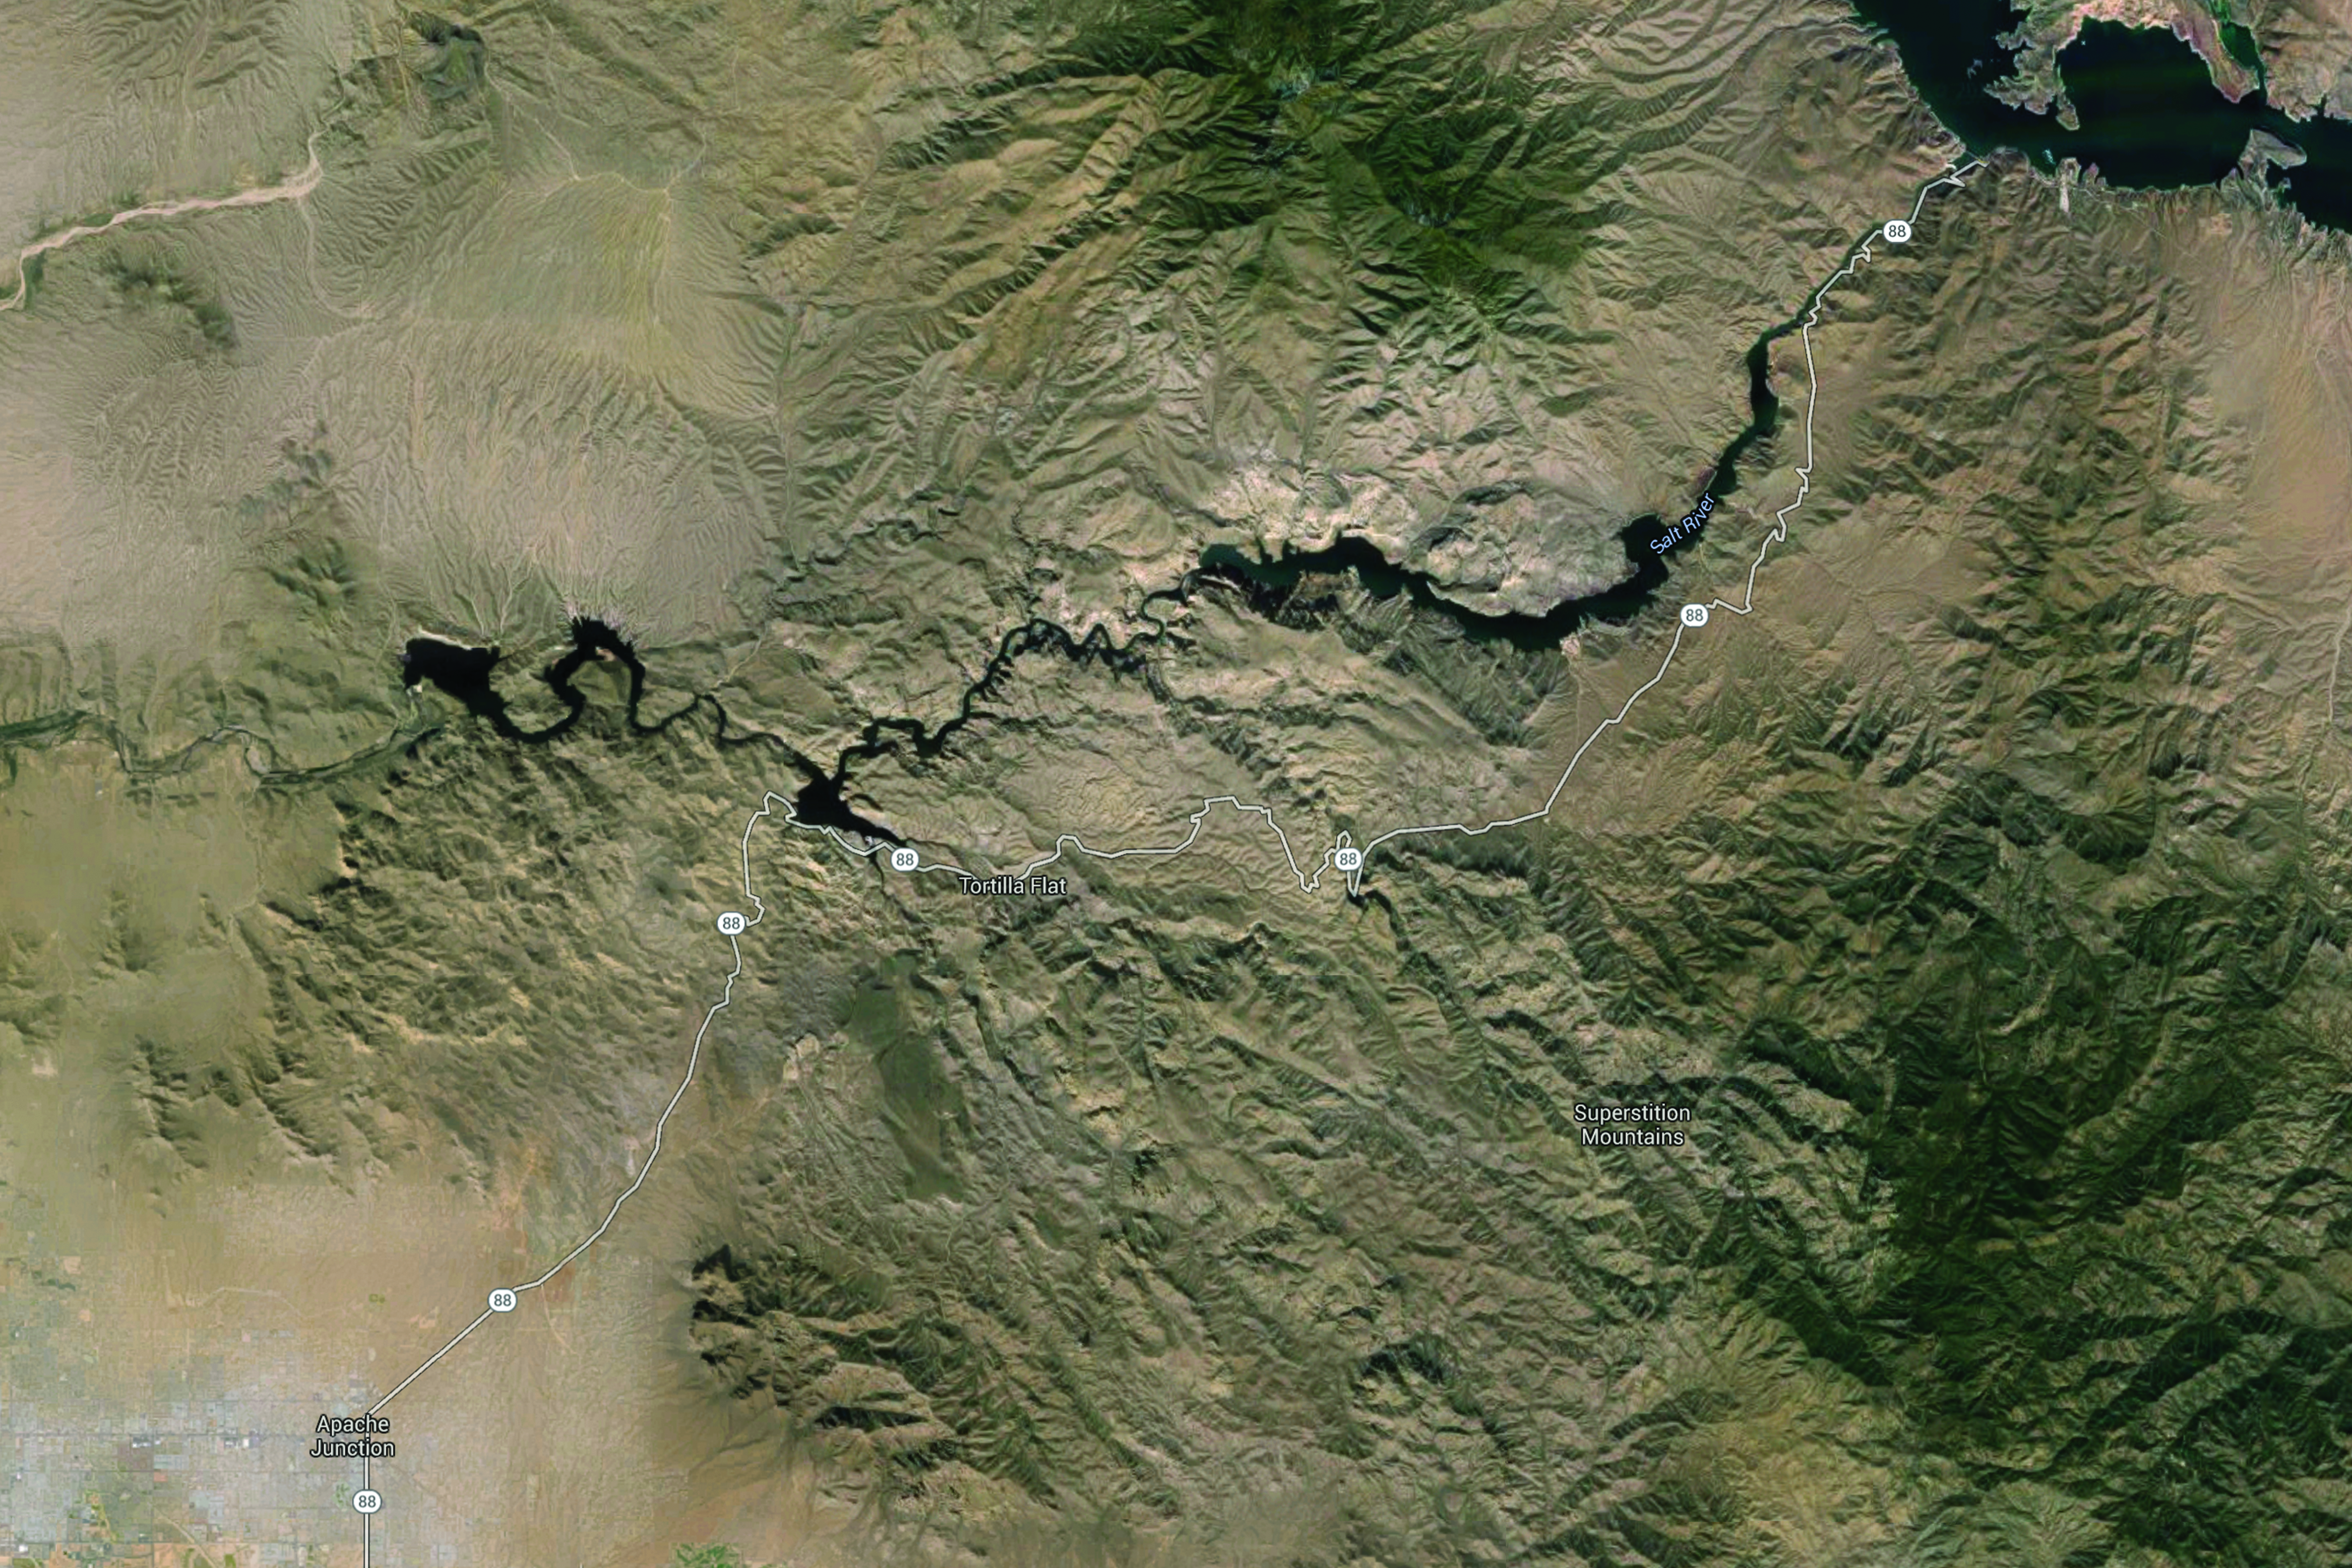 Satellite view of Arizona State Route 88, imagery and map data copyright Google 2016